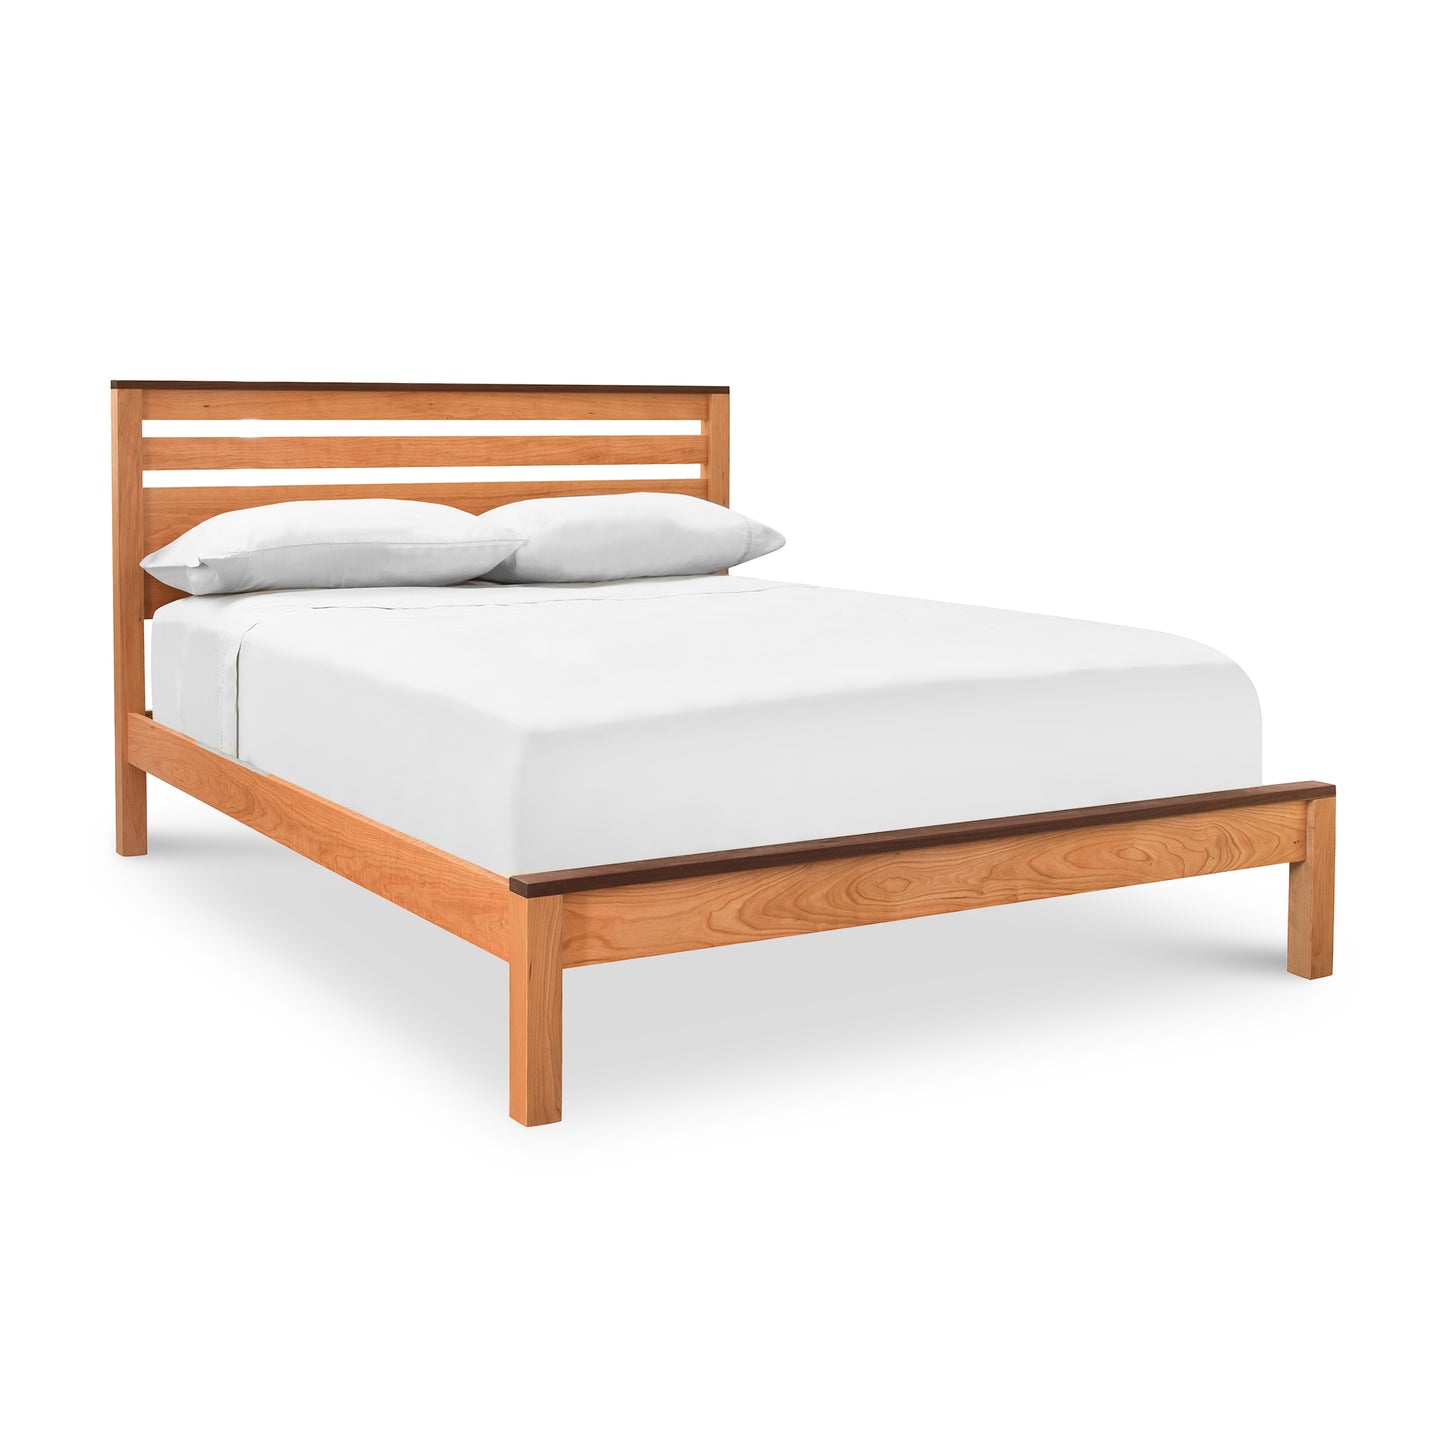 The Vermont Furniture Designs Skyline Panel Bed, handmade-to-order with a natural eco-friendly hand-rubbed oil finish, is elegantly adorned with white sheets.